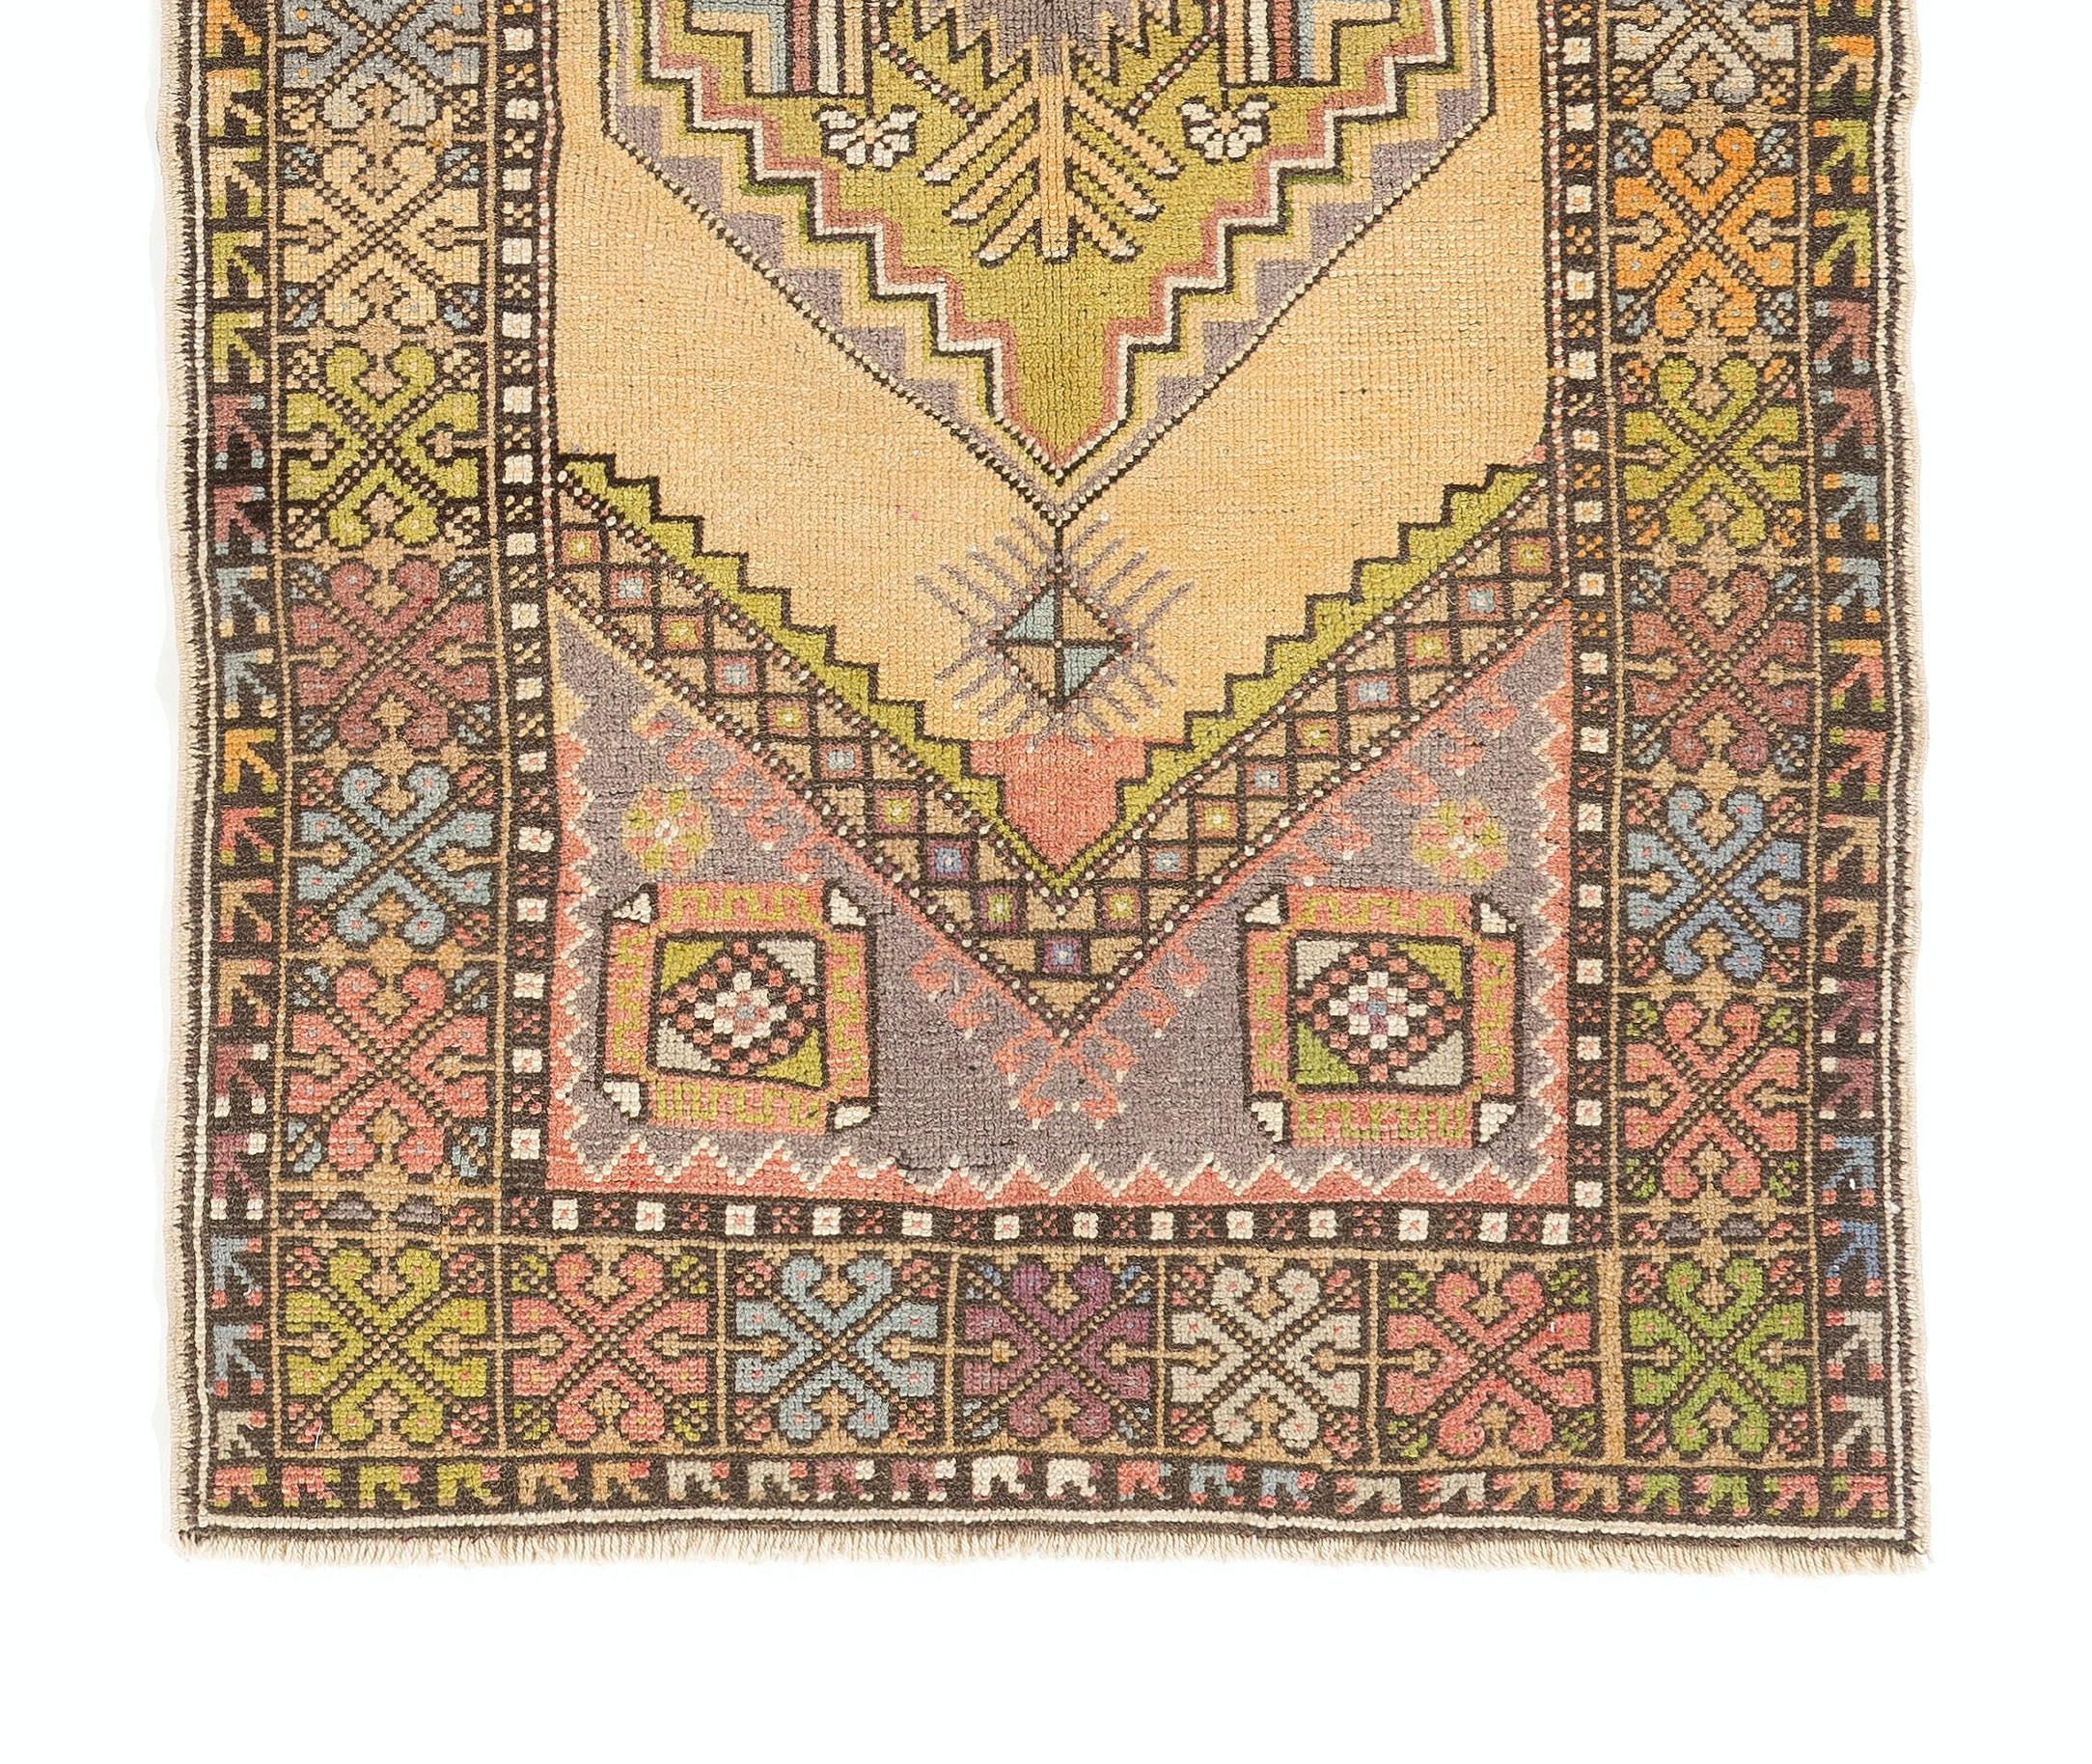 A one of a kind vintage Central Anatolian rug made of hand-dyed and hand-spun wool.
It has soft medium pile. Very good condition. It's soft and warm color palette has a vibrancy to it that could be a great complementary piece for a variety of